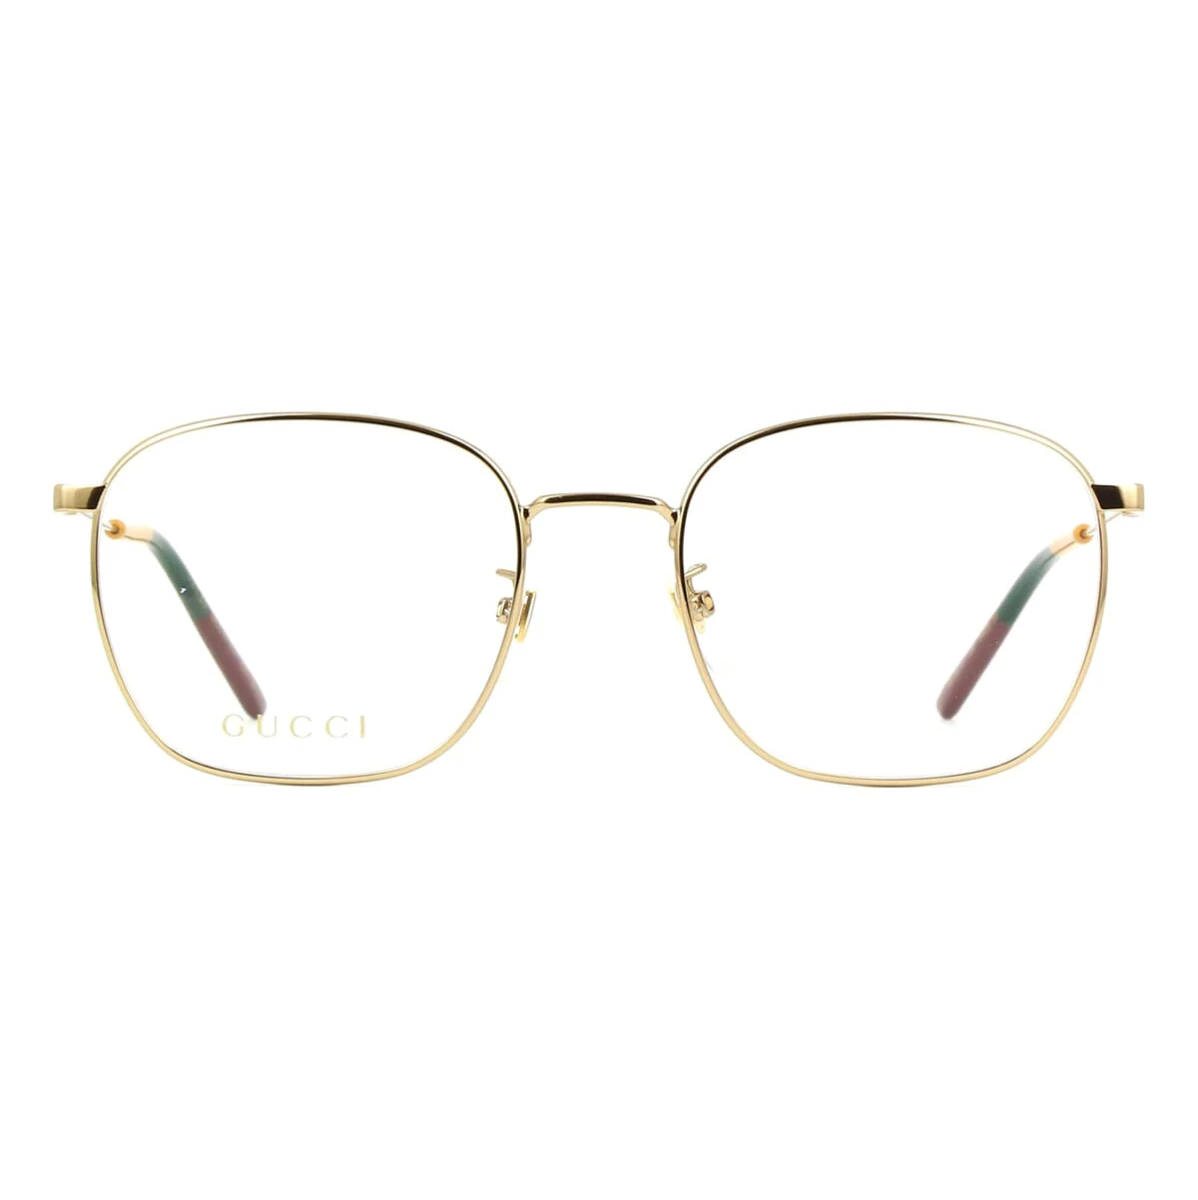 "Discounted Gucci Eyeglasses - Model 0681O frames offering premium quality."